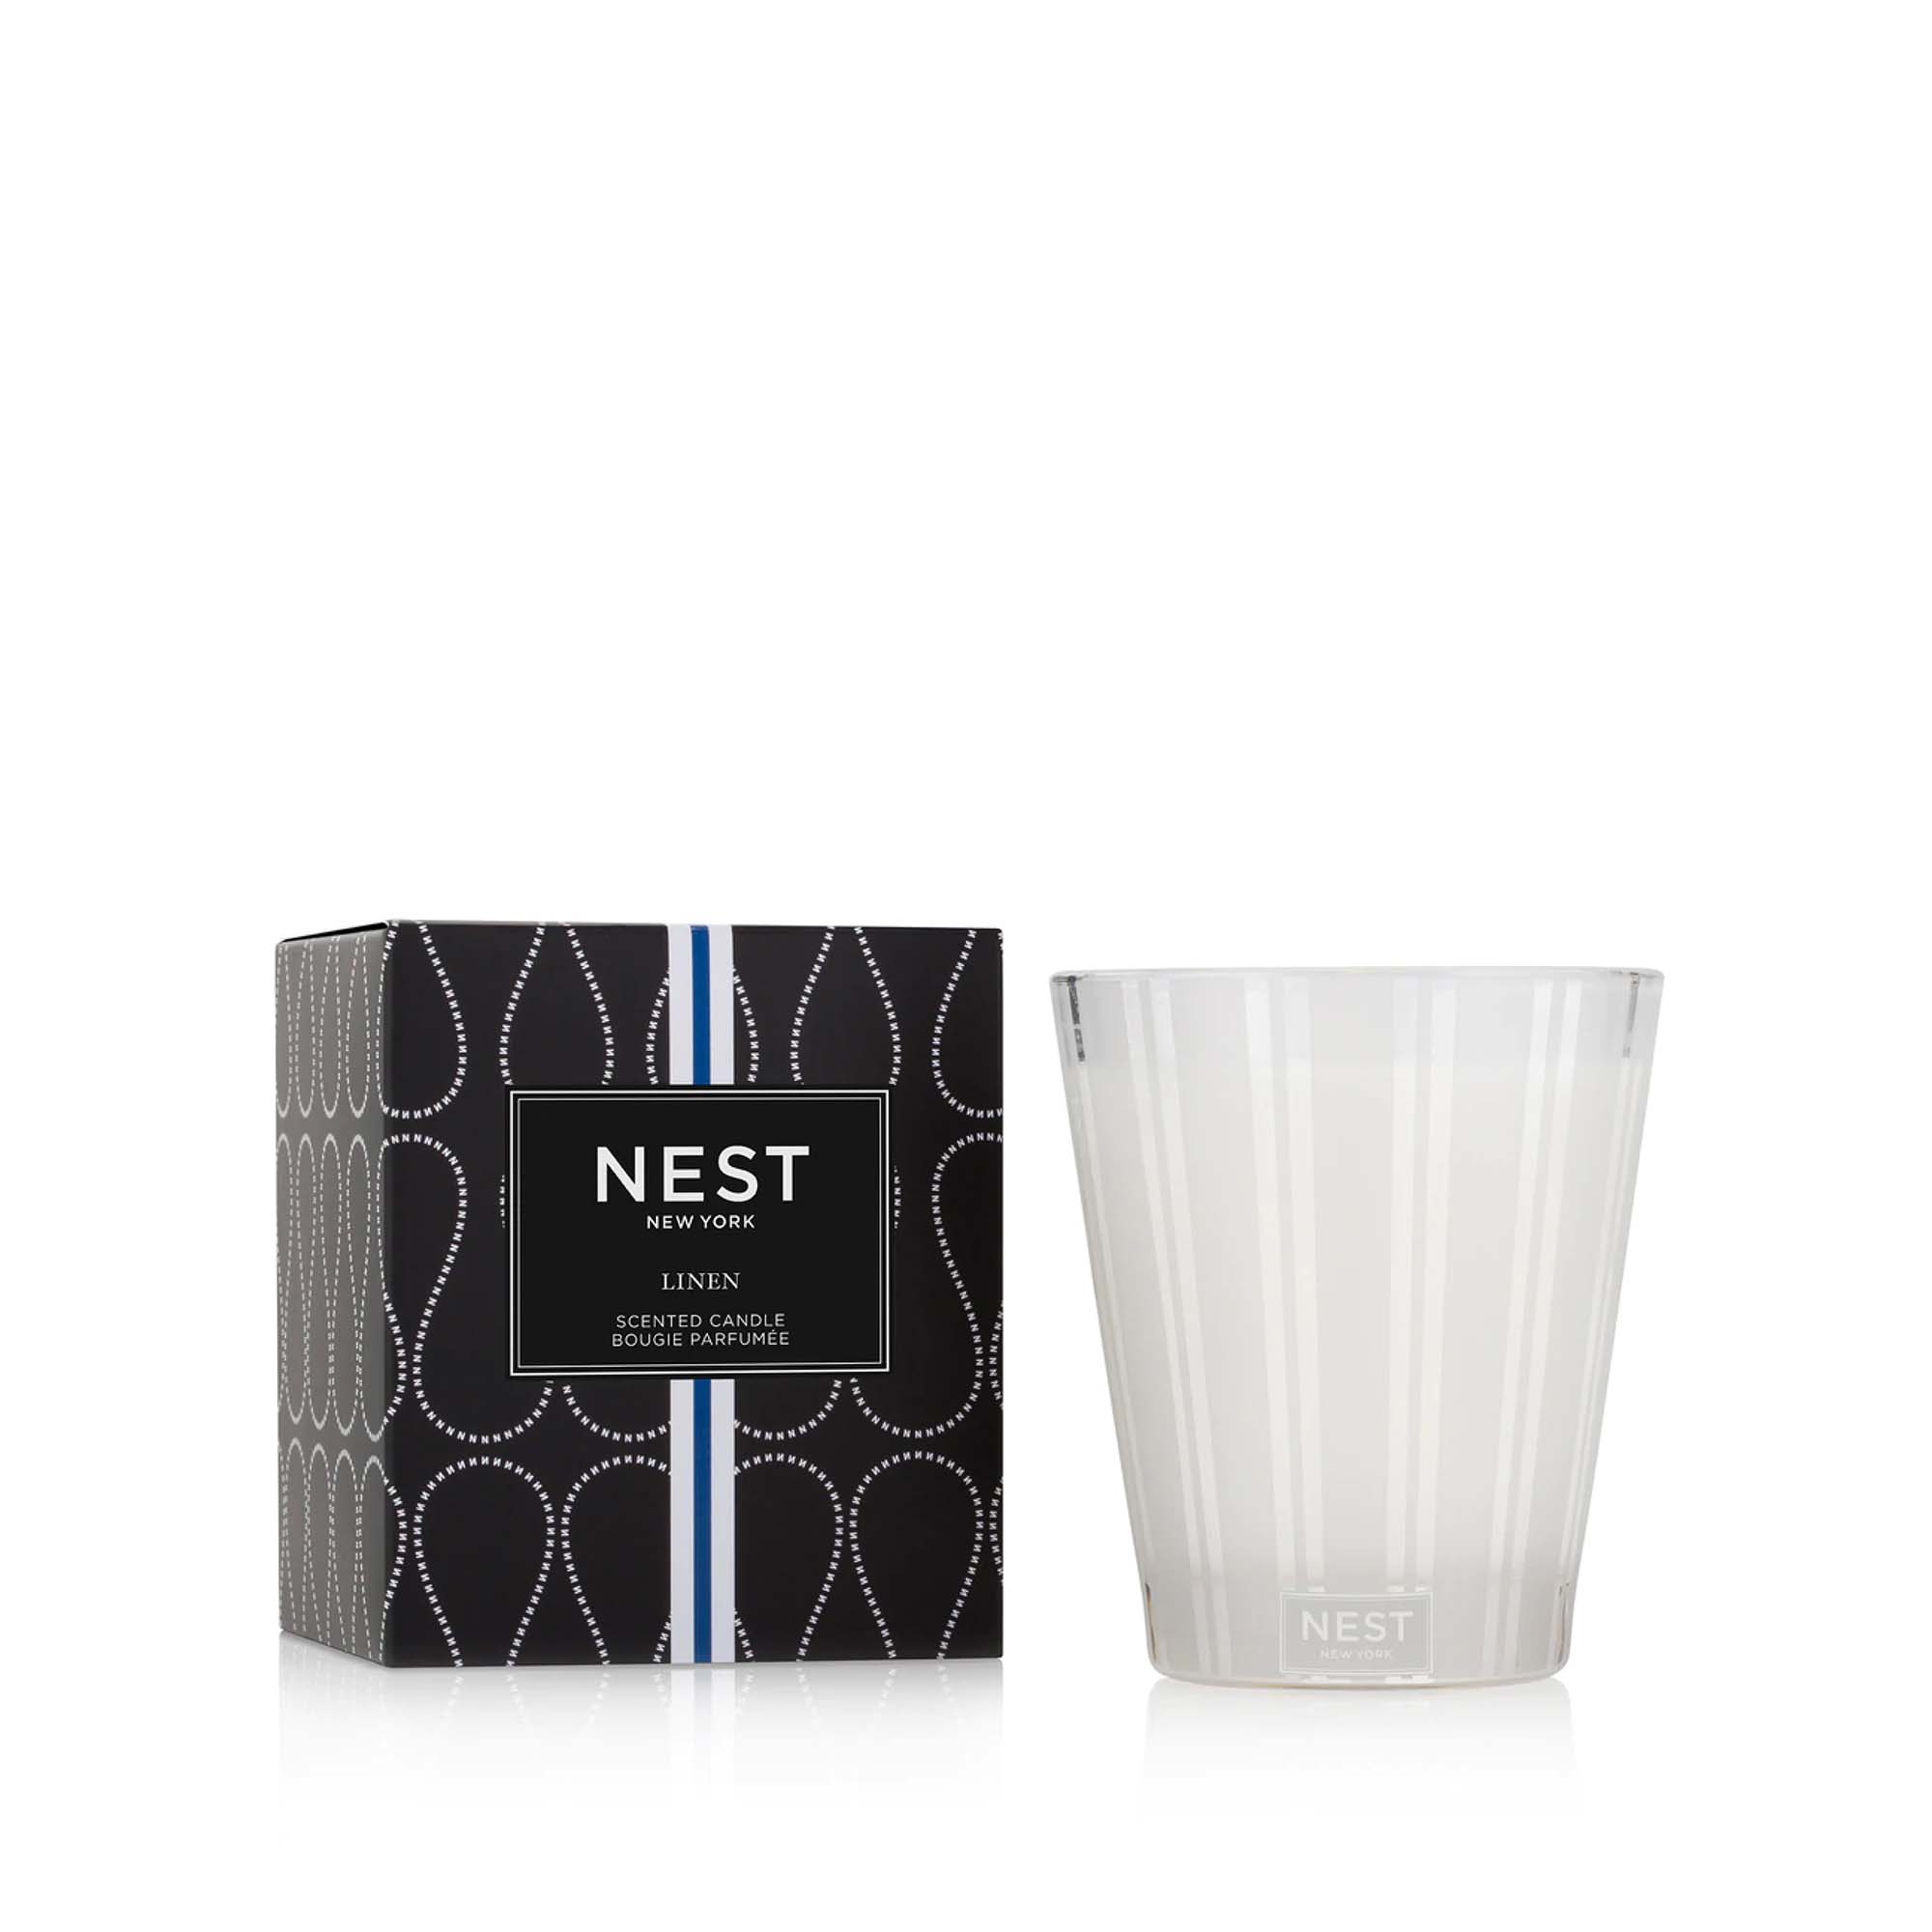 Linen 3-Wick  21.2 oz Candle by Nest New York